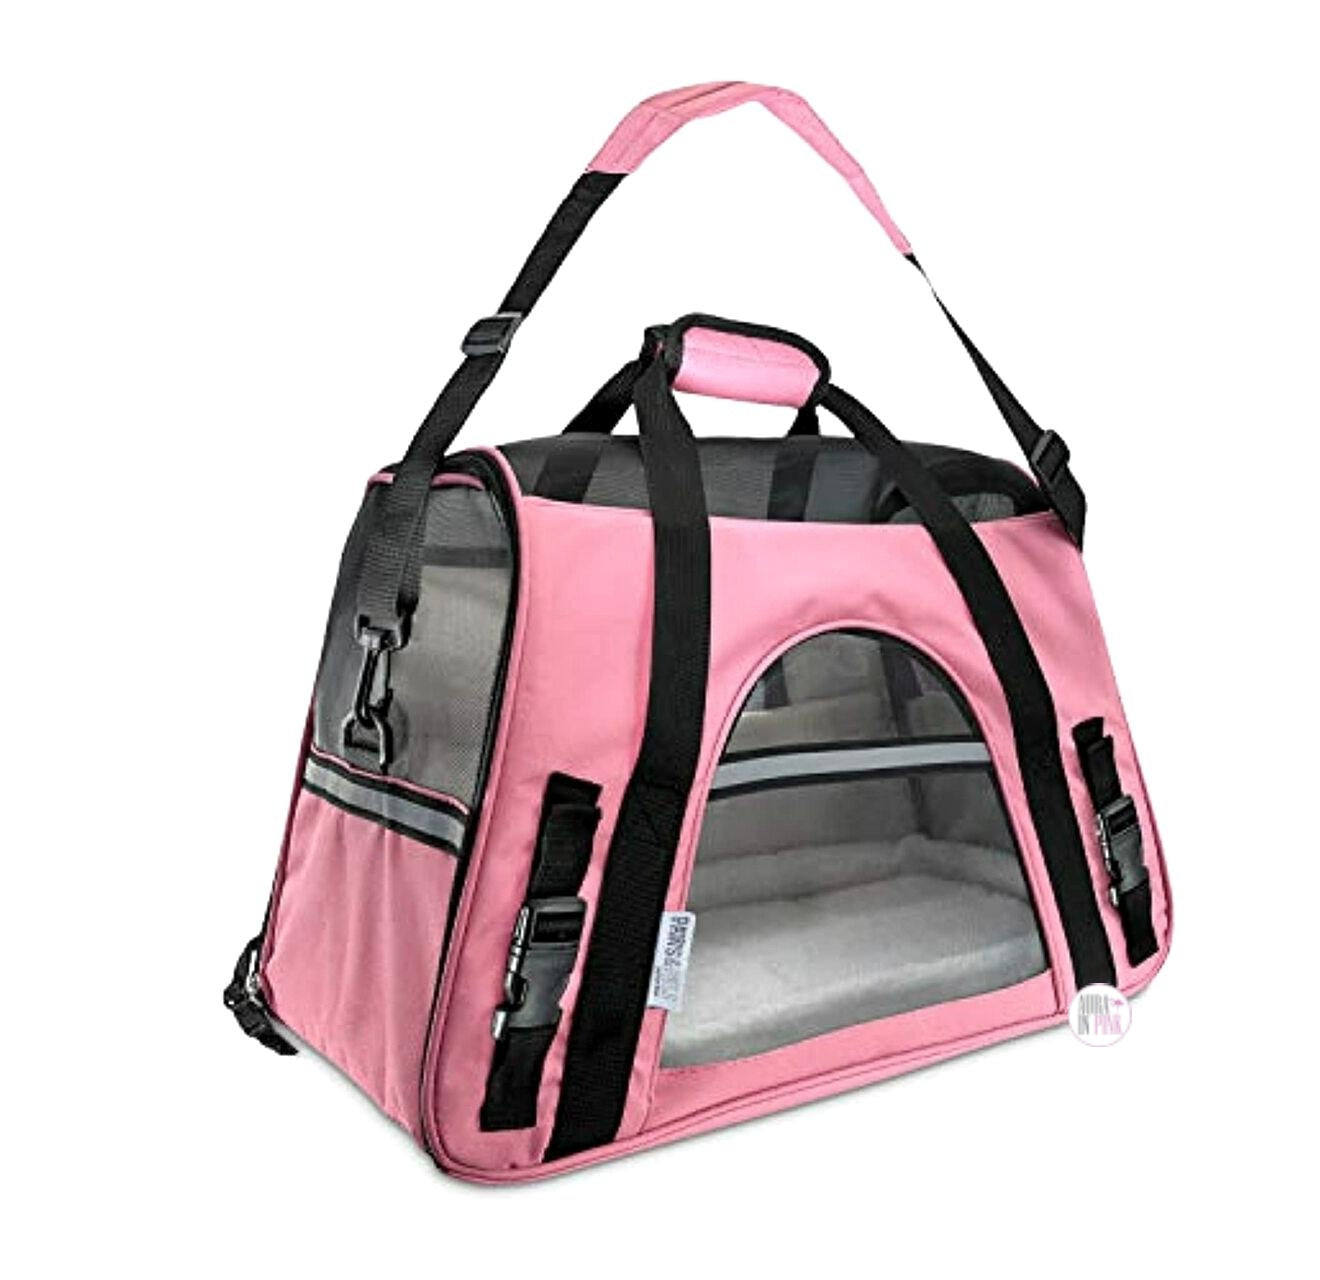 Paws & Pals Airline Approved Pink Cozy Commuter Soft Pet Travel